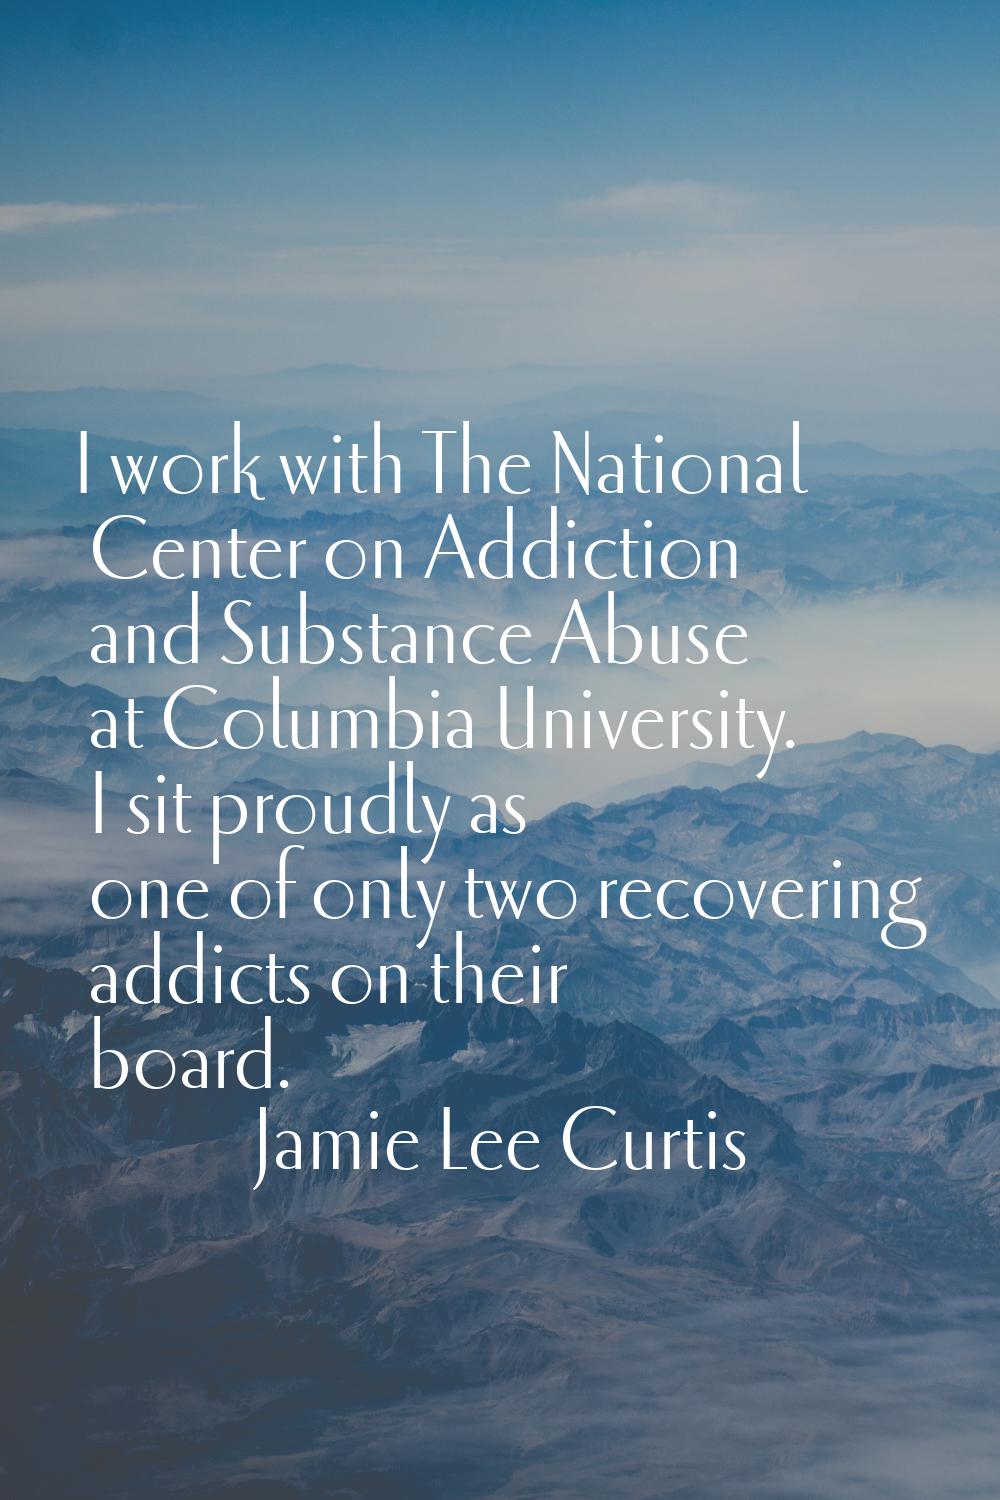 I work with The National Center on Addiction and Substance Abuse at Columbia University. I sit prou